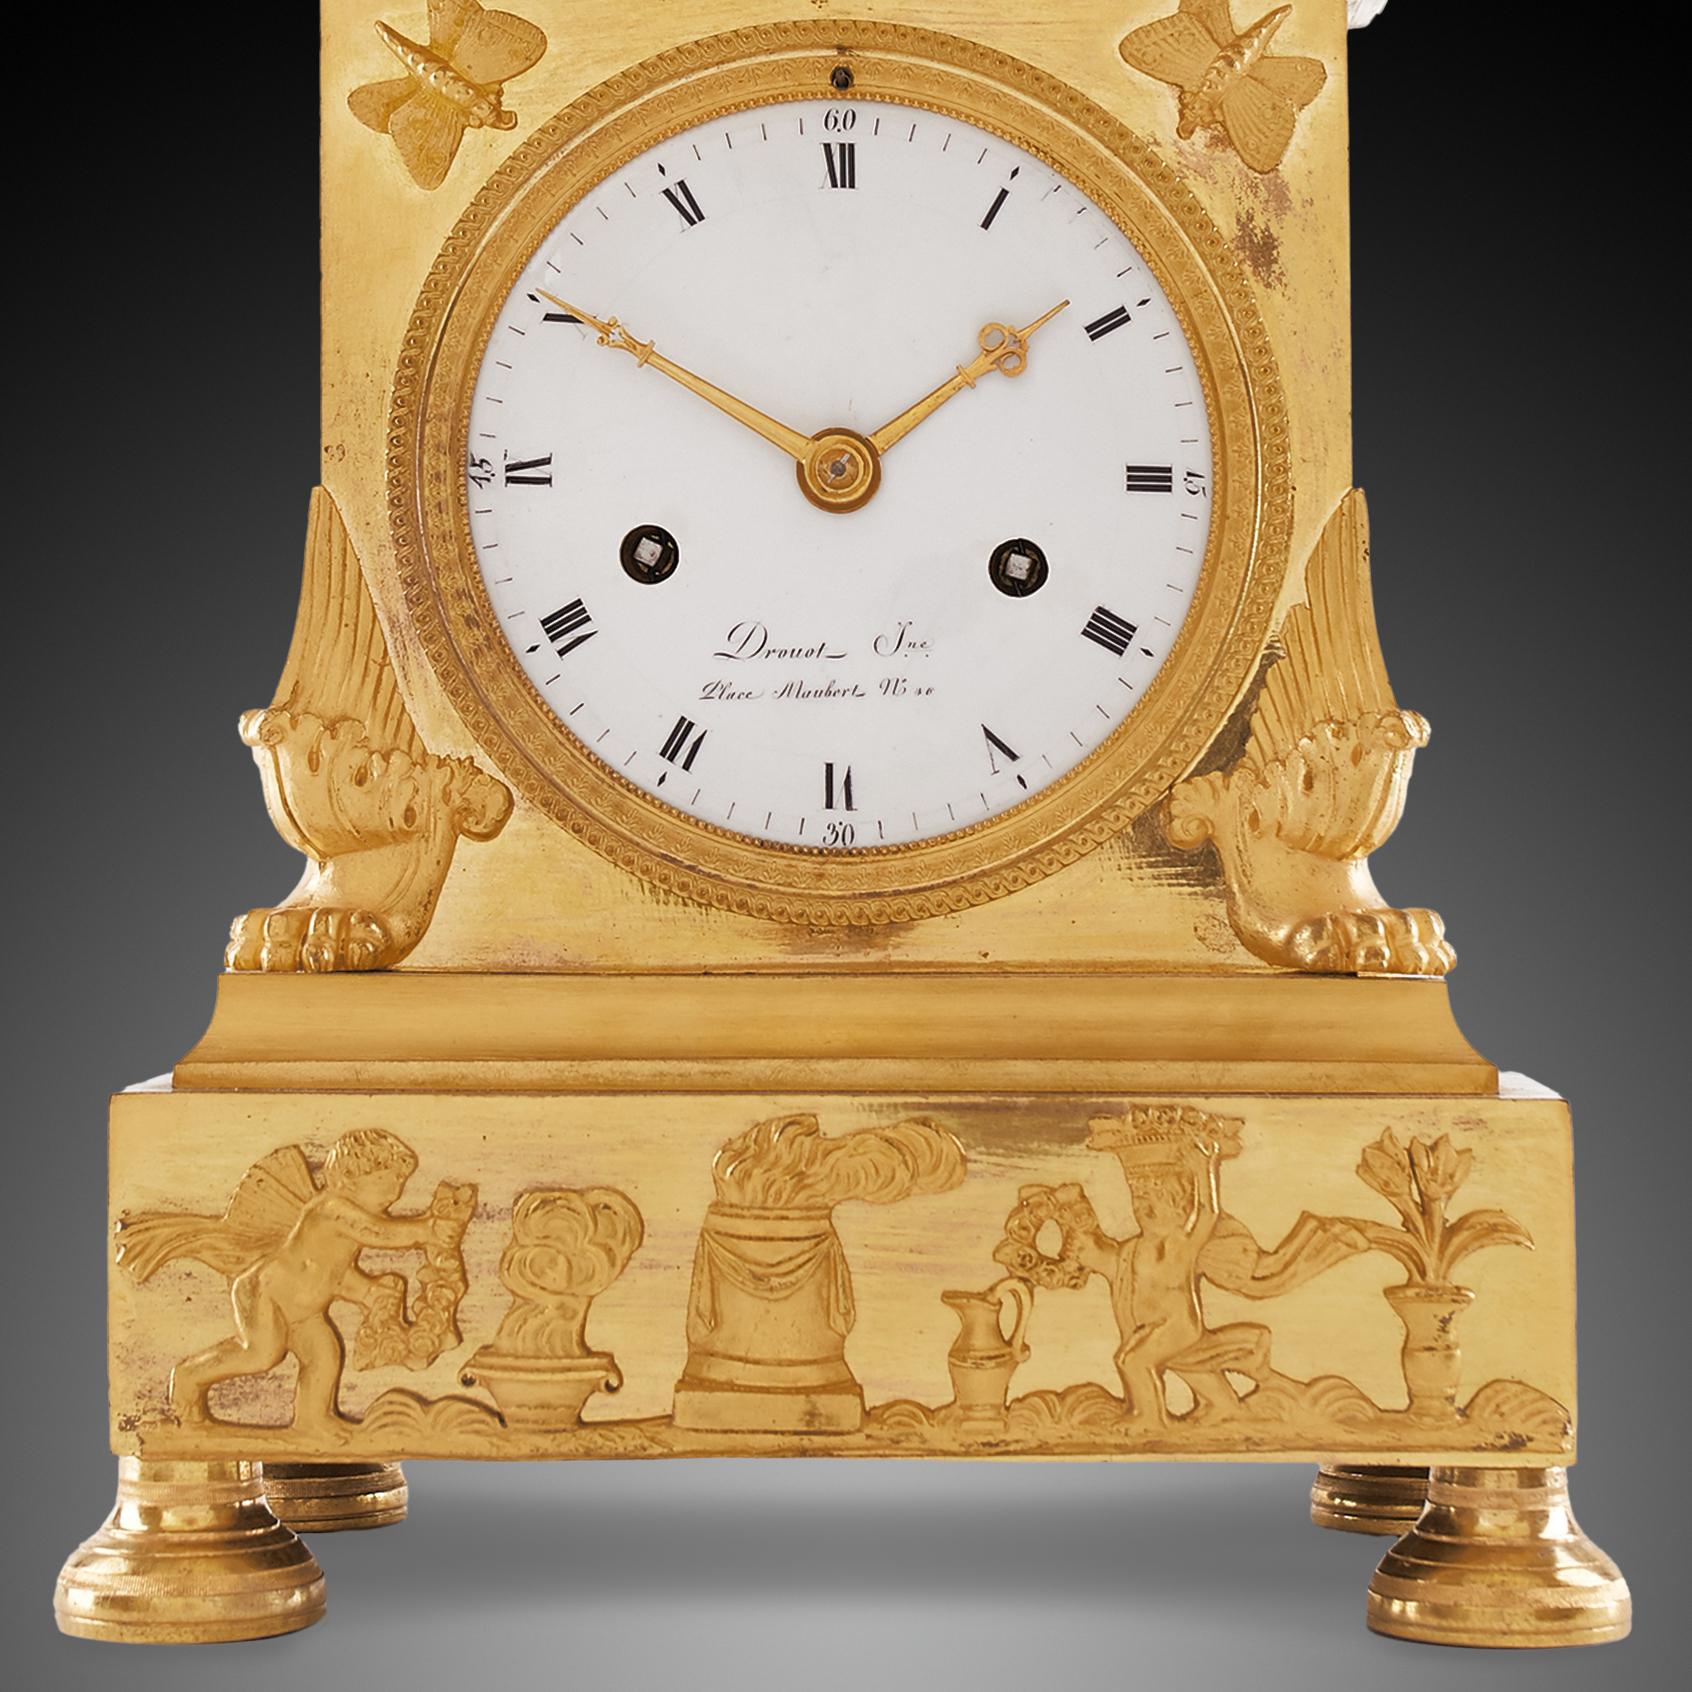 Mantel Clock 19th Century Styl Empire by Drouot Place Moubert For Sale 1